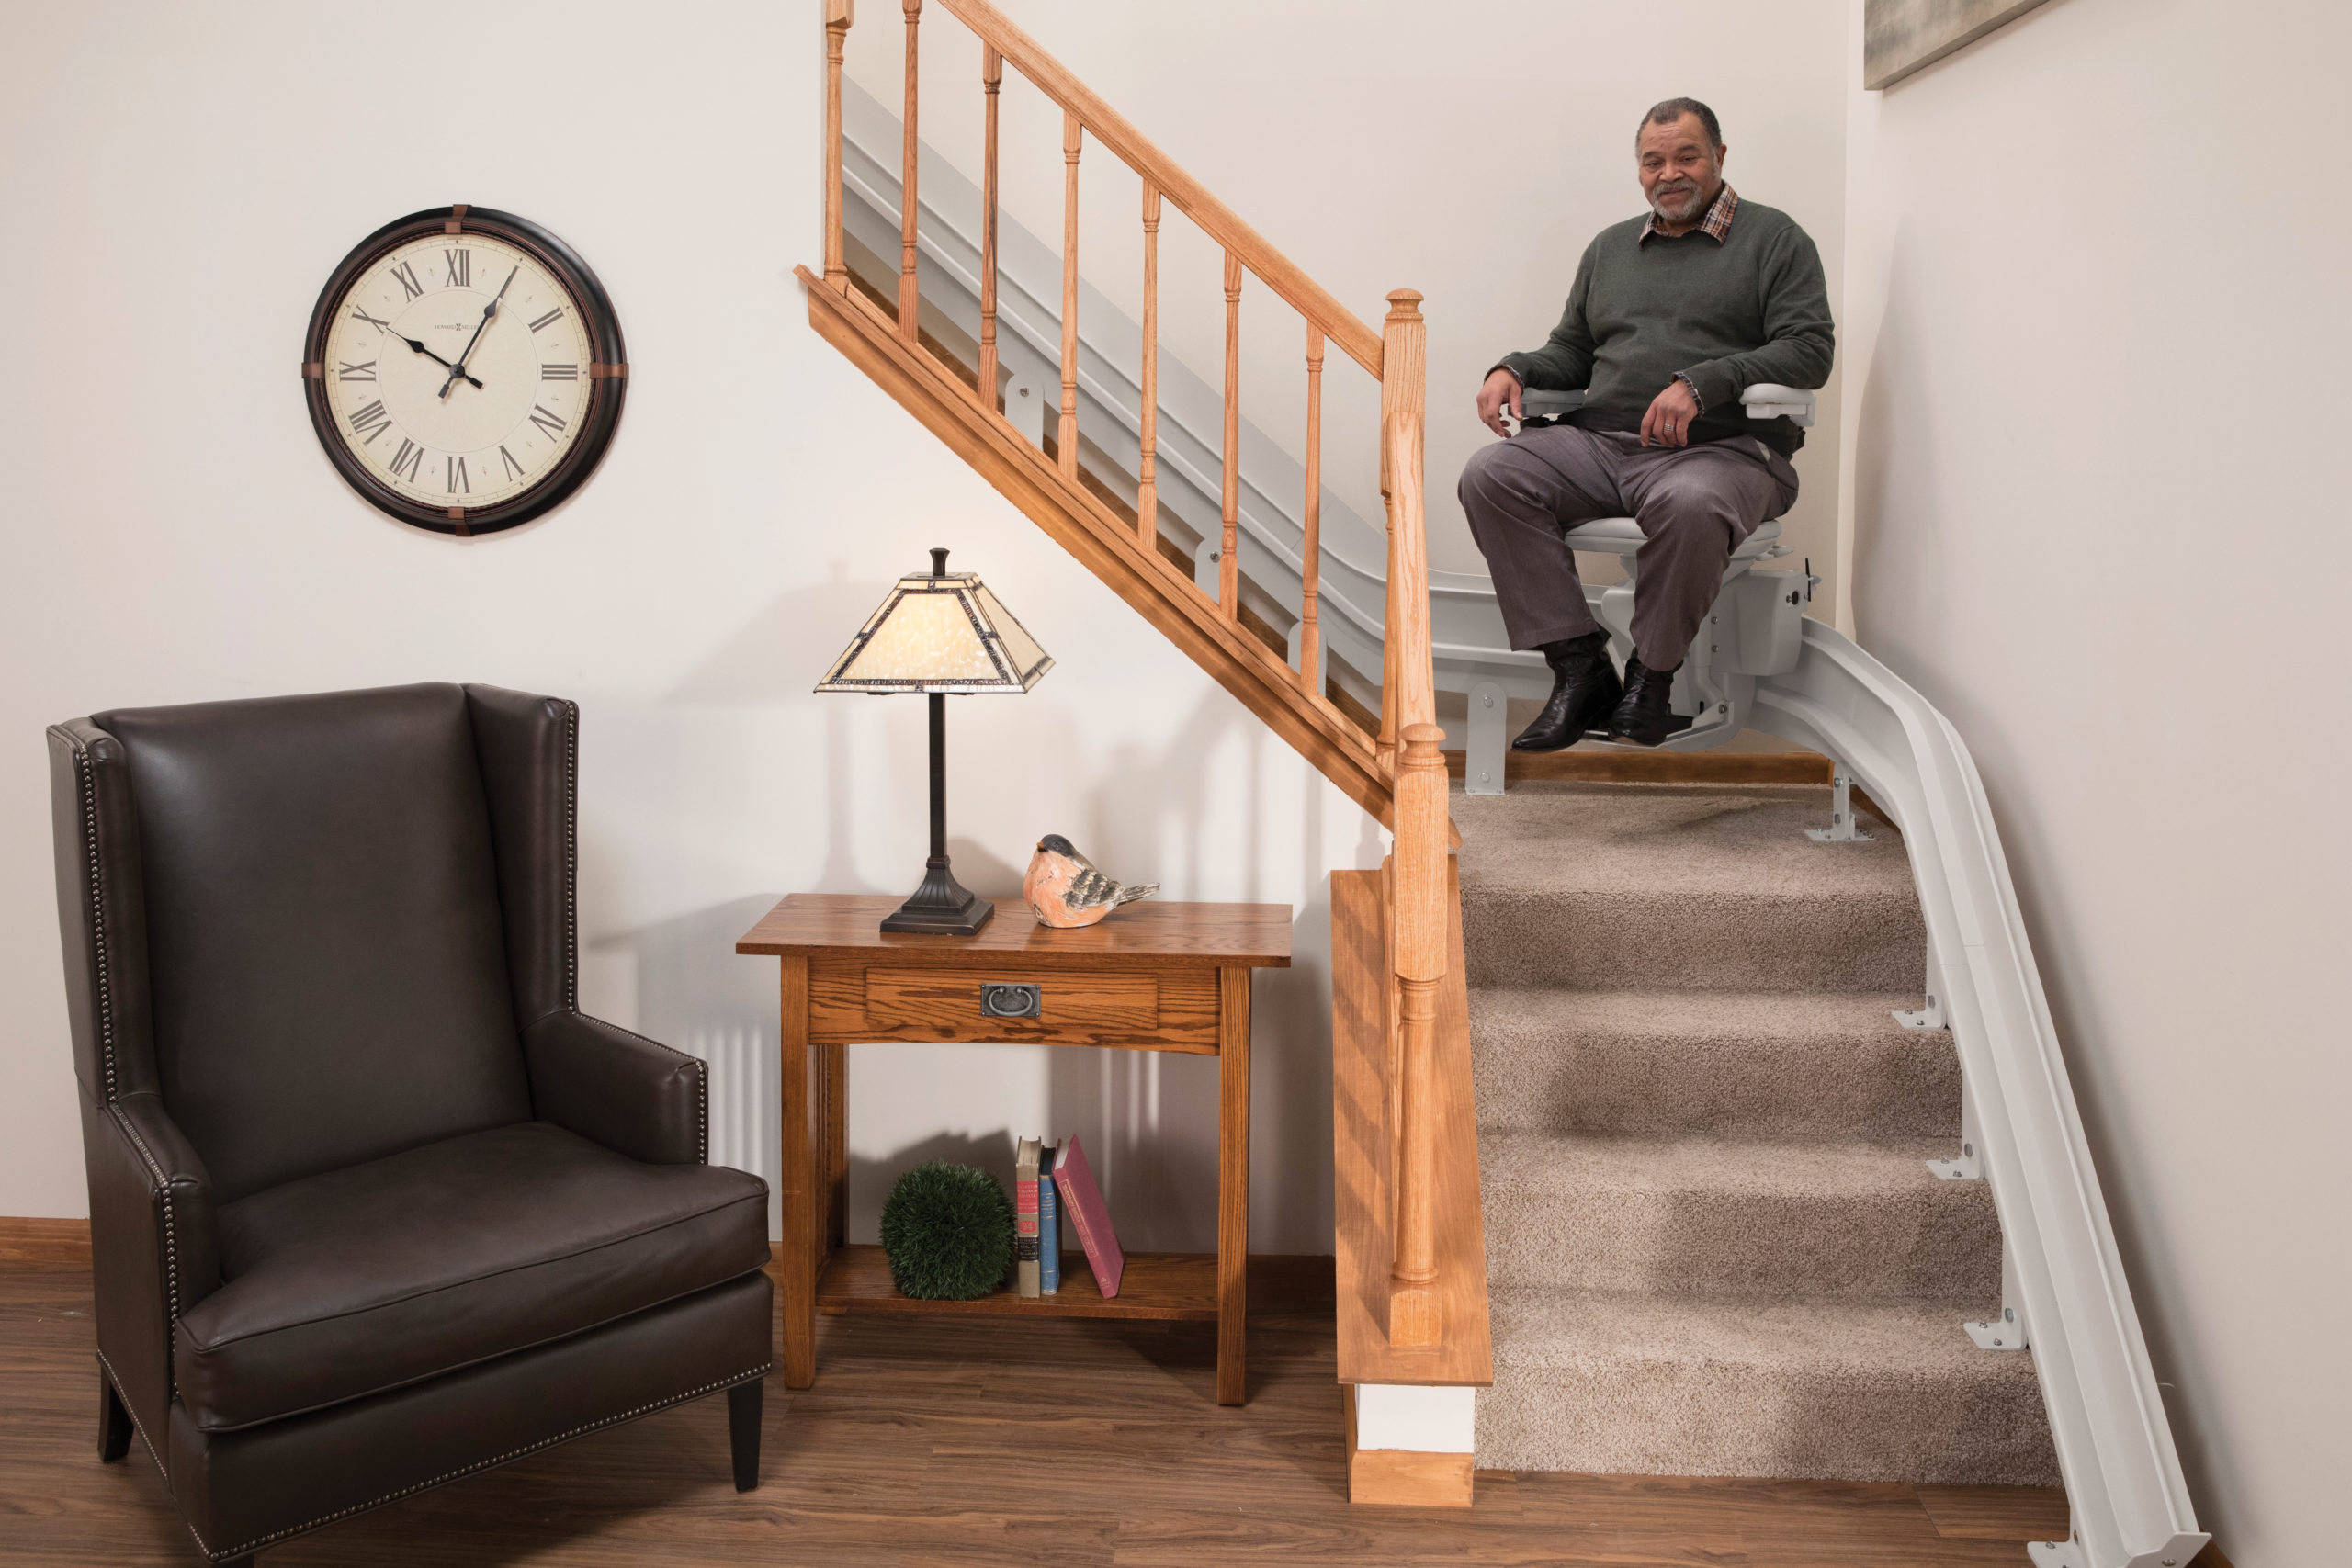 Vertical Platform Lifts, Medical Home Modification | Mission Health + Home in Rochester, NY